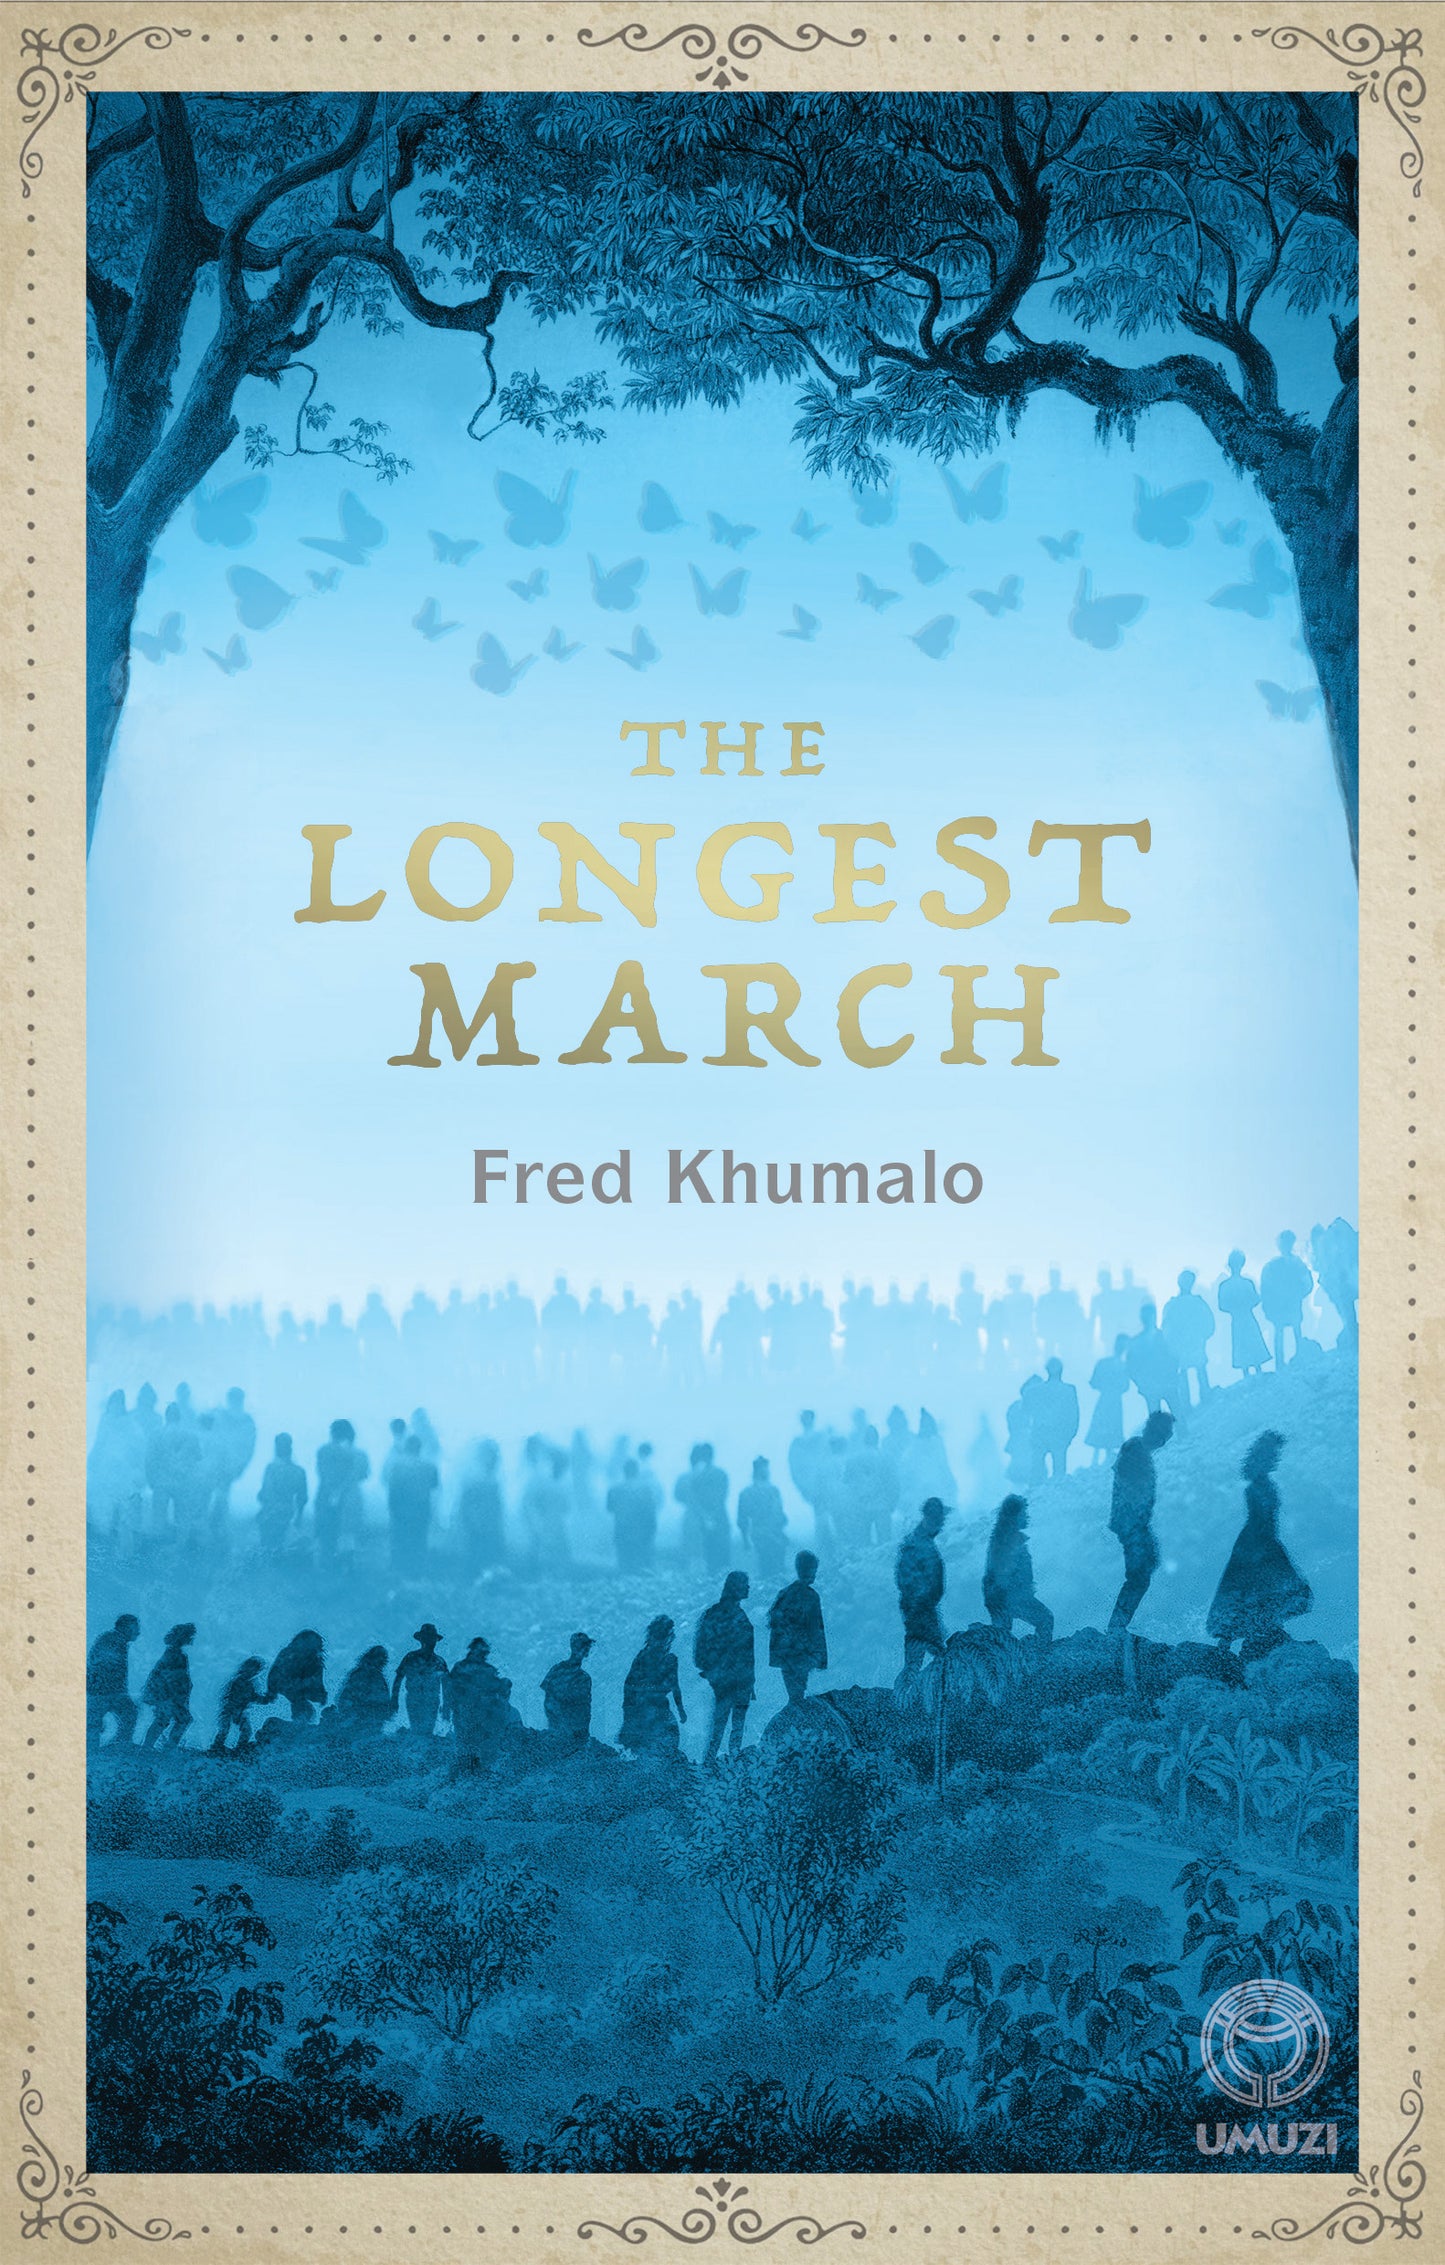 The Longest March, by Fred Khumalo